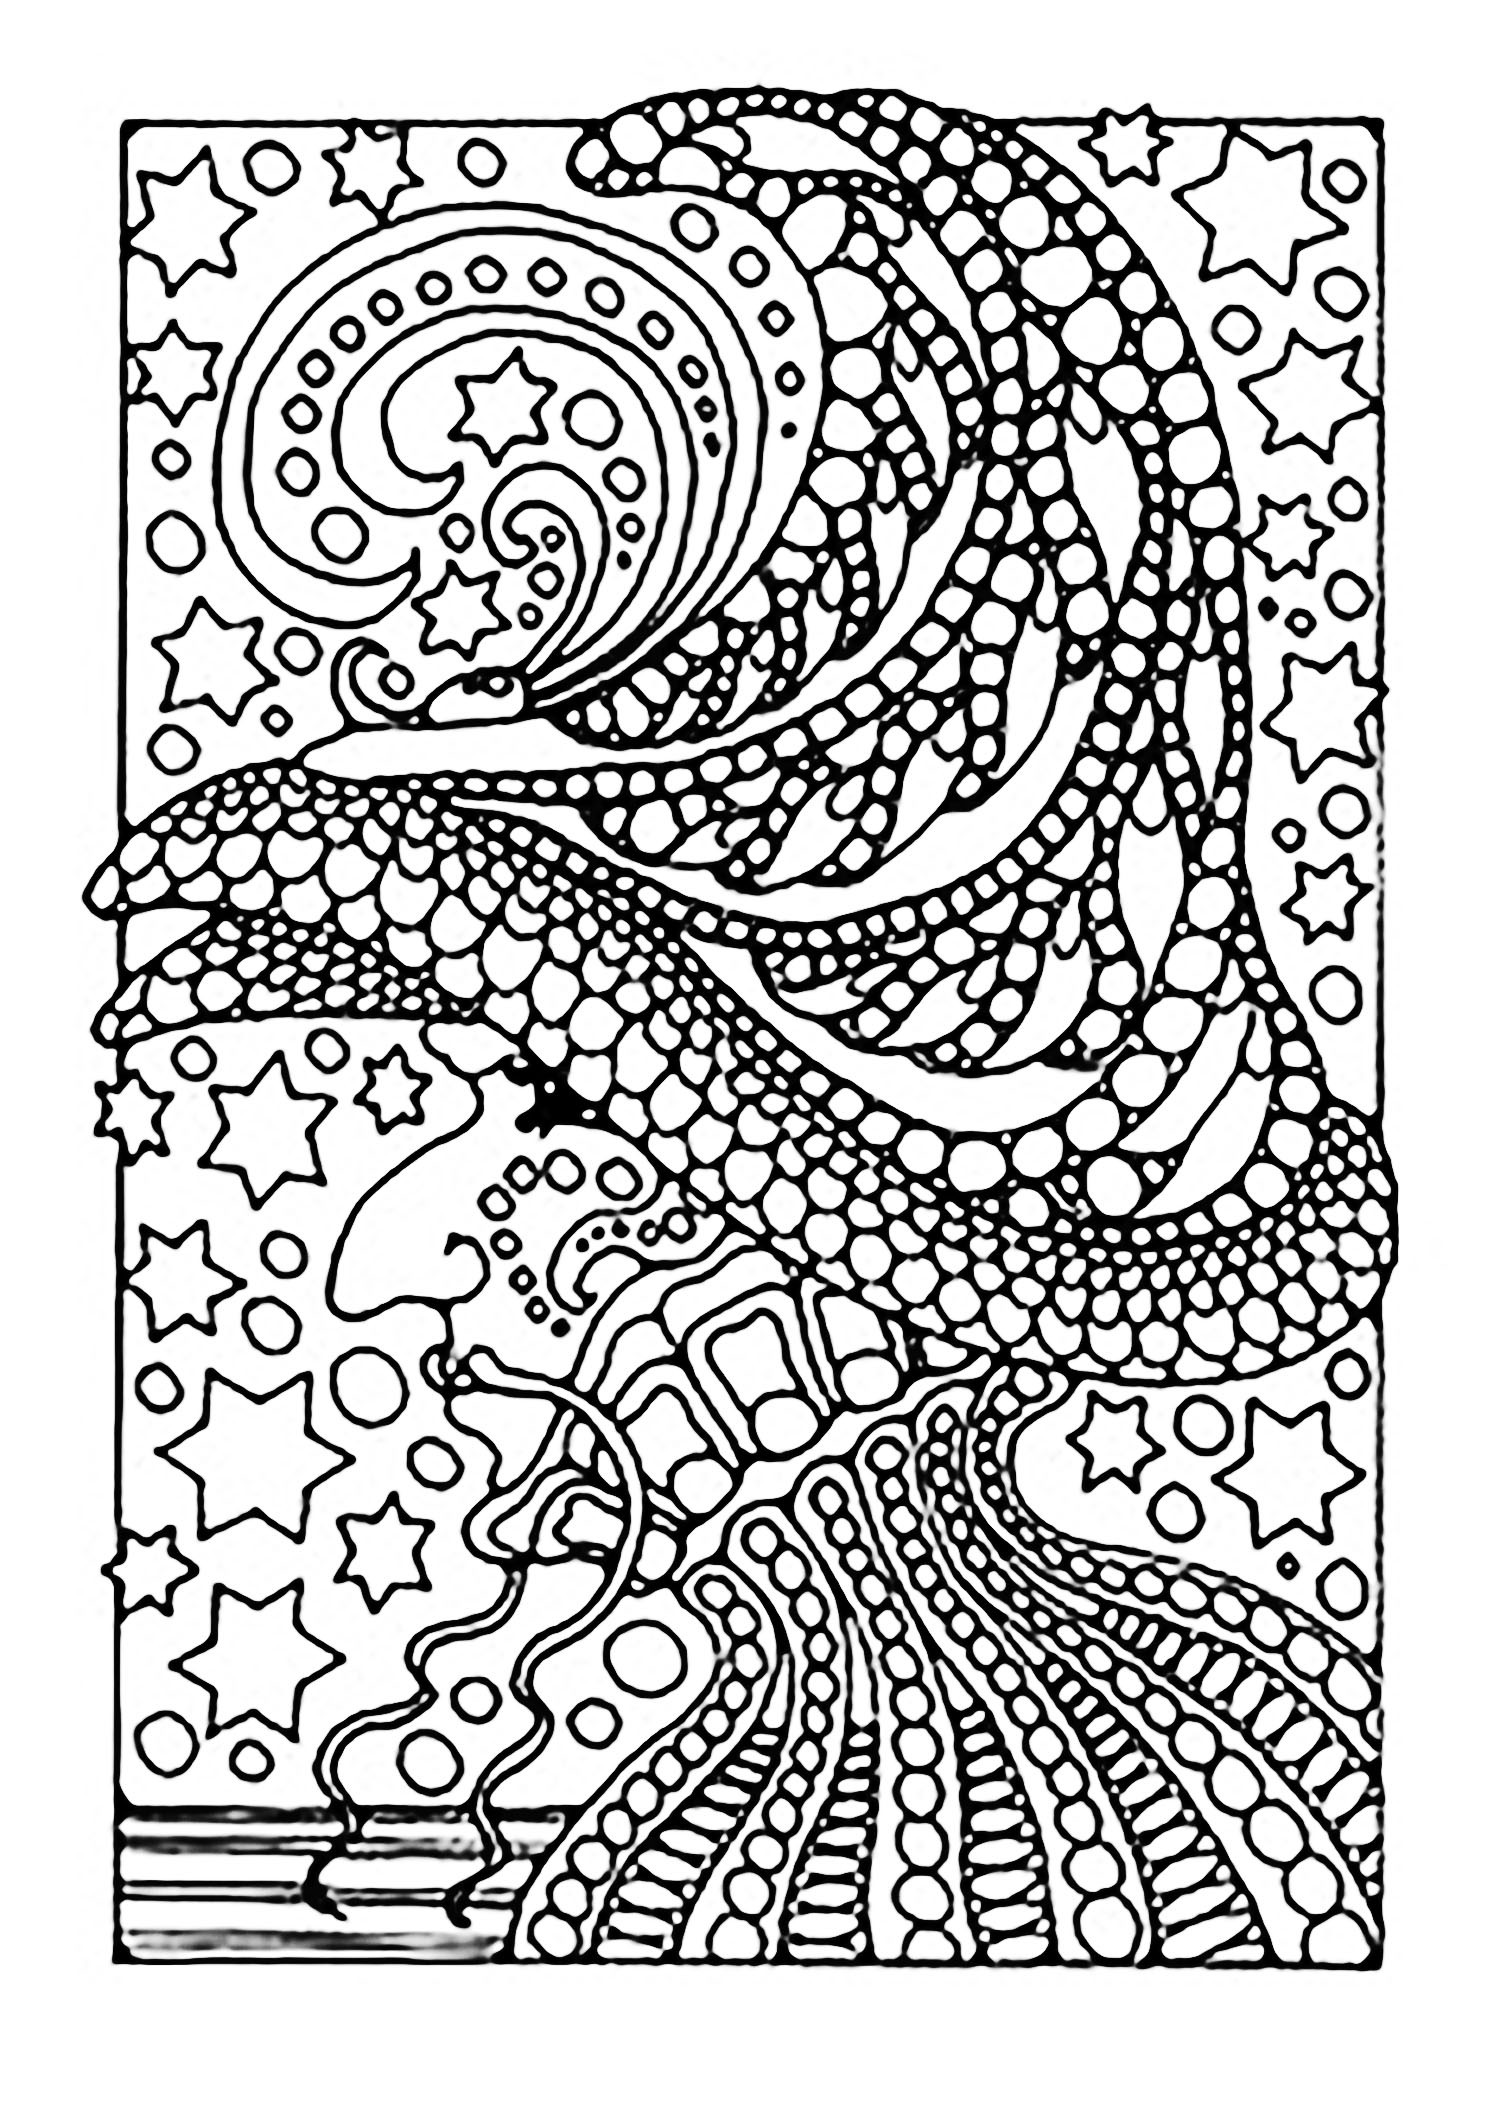 Adult Coloring Pages Halloween
 Halloween witch and stars Halloween Adult Coloring Pages